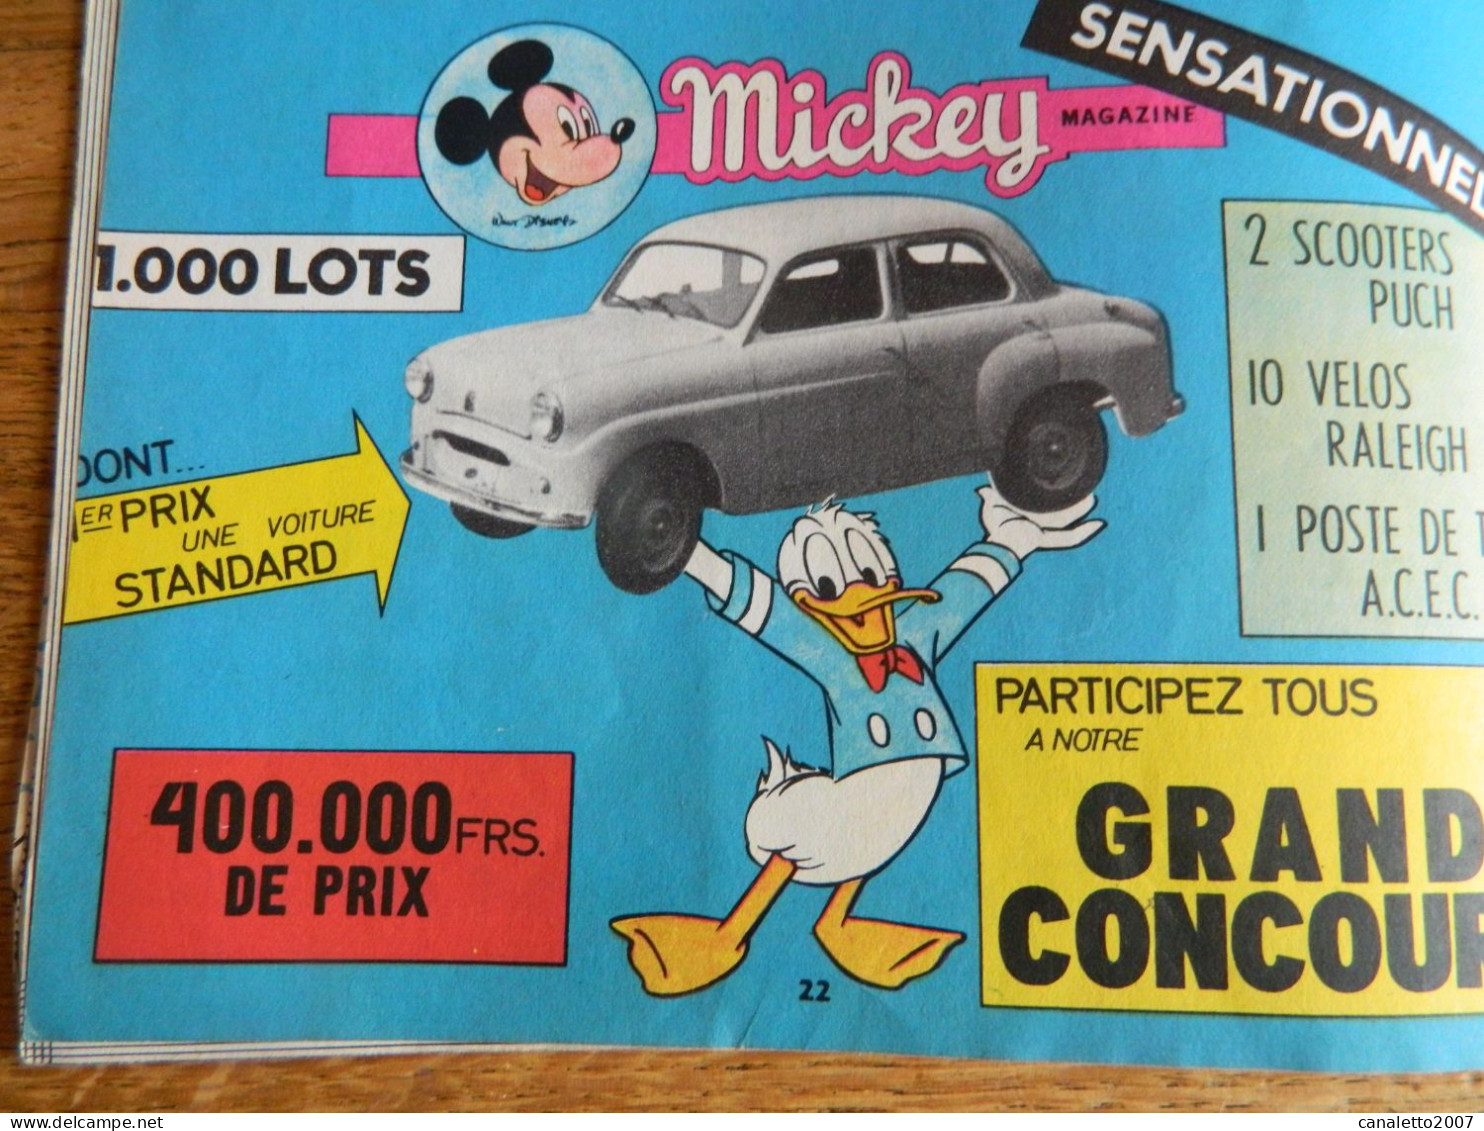 MICKEY: WALT DISNEY: MICKEY SPECIAL 55 DU 6 JANVIER 1955 N°222 -5EME ANNEE 36 PAGES AVEC COUVERTURE